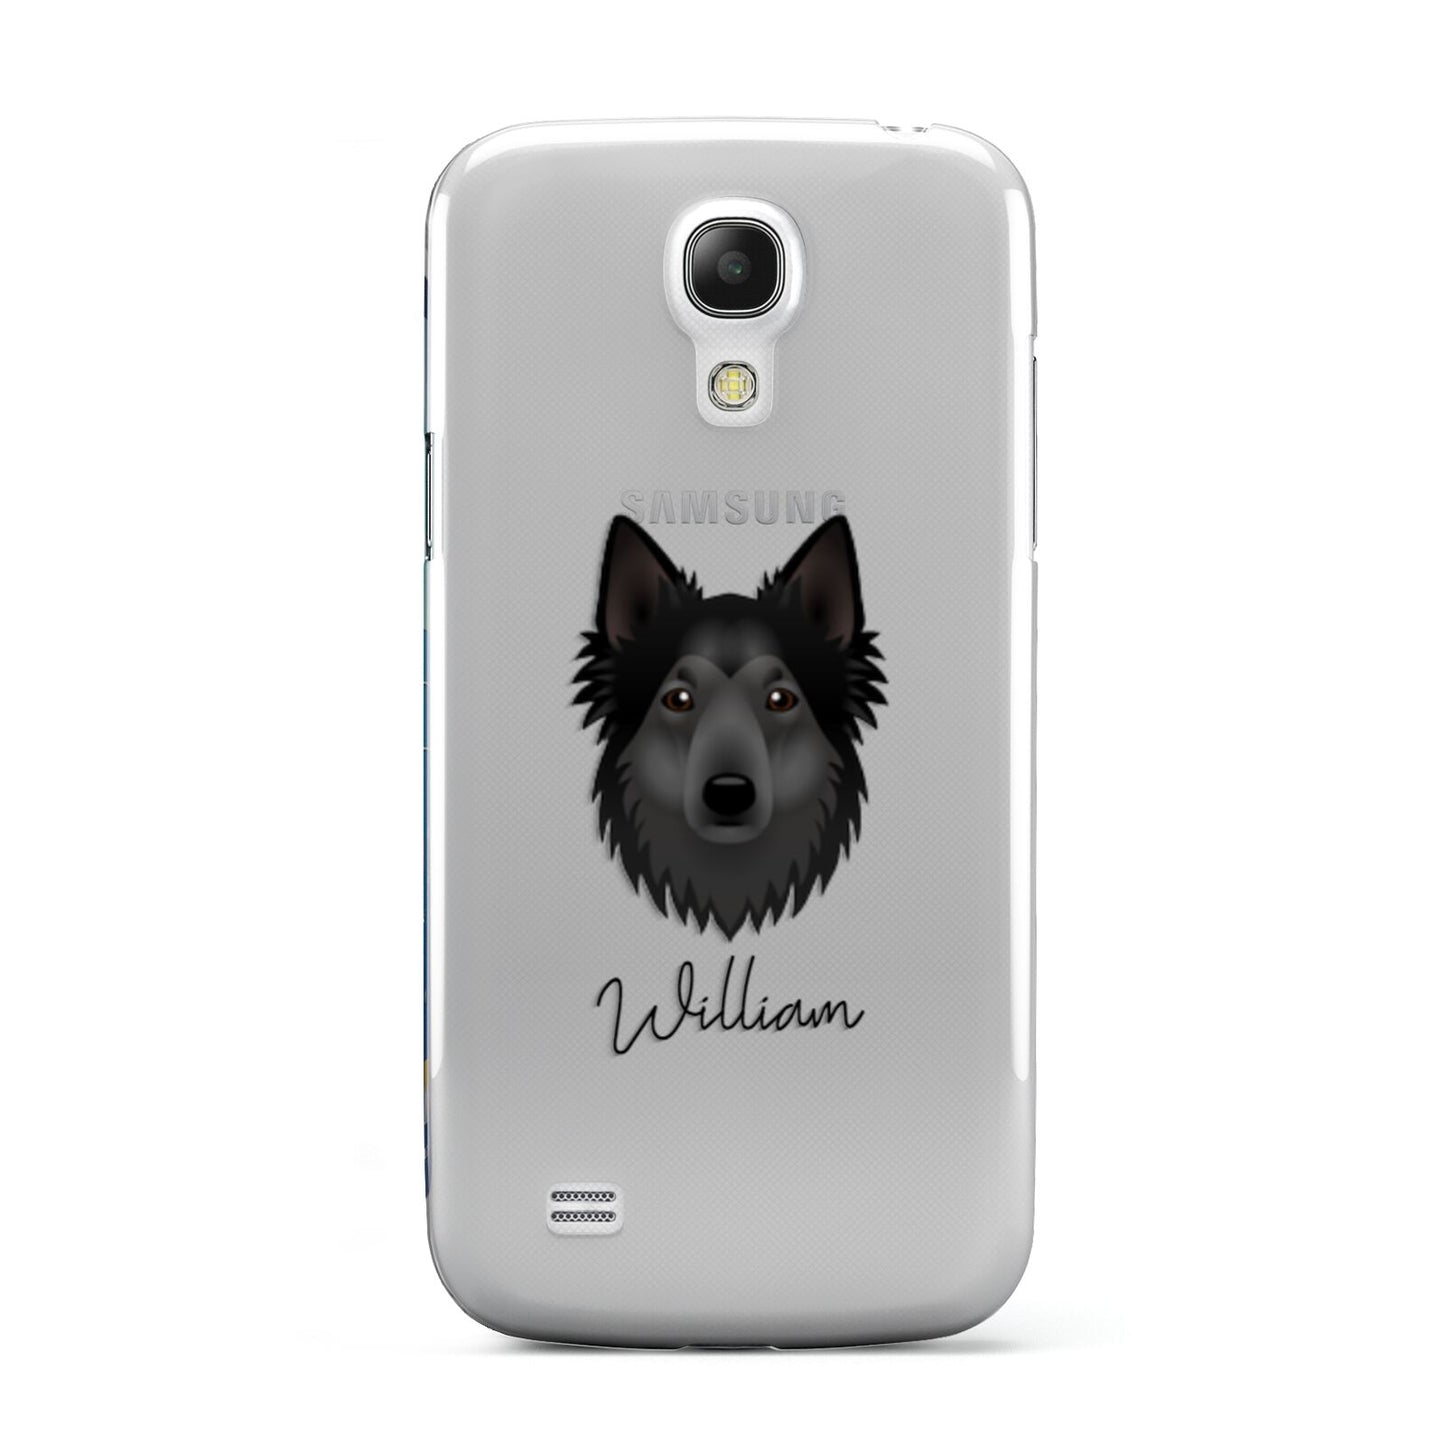 Shollie Personalised Samsung Galaxy S4 Mini Case